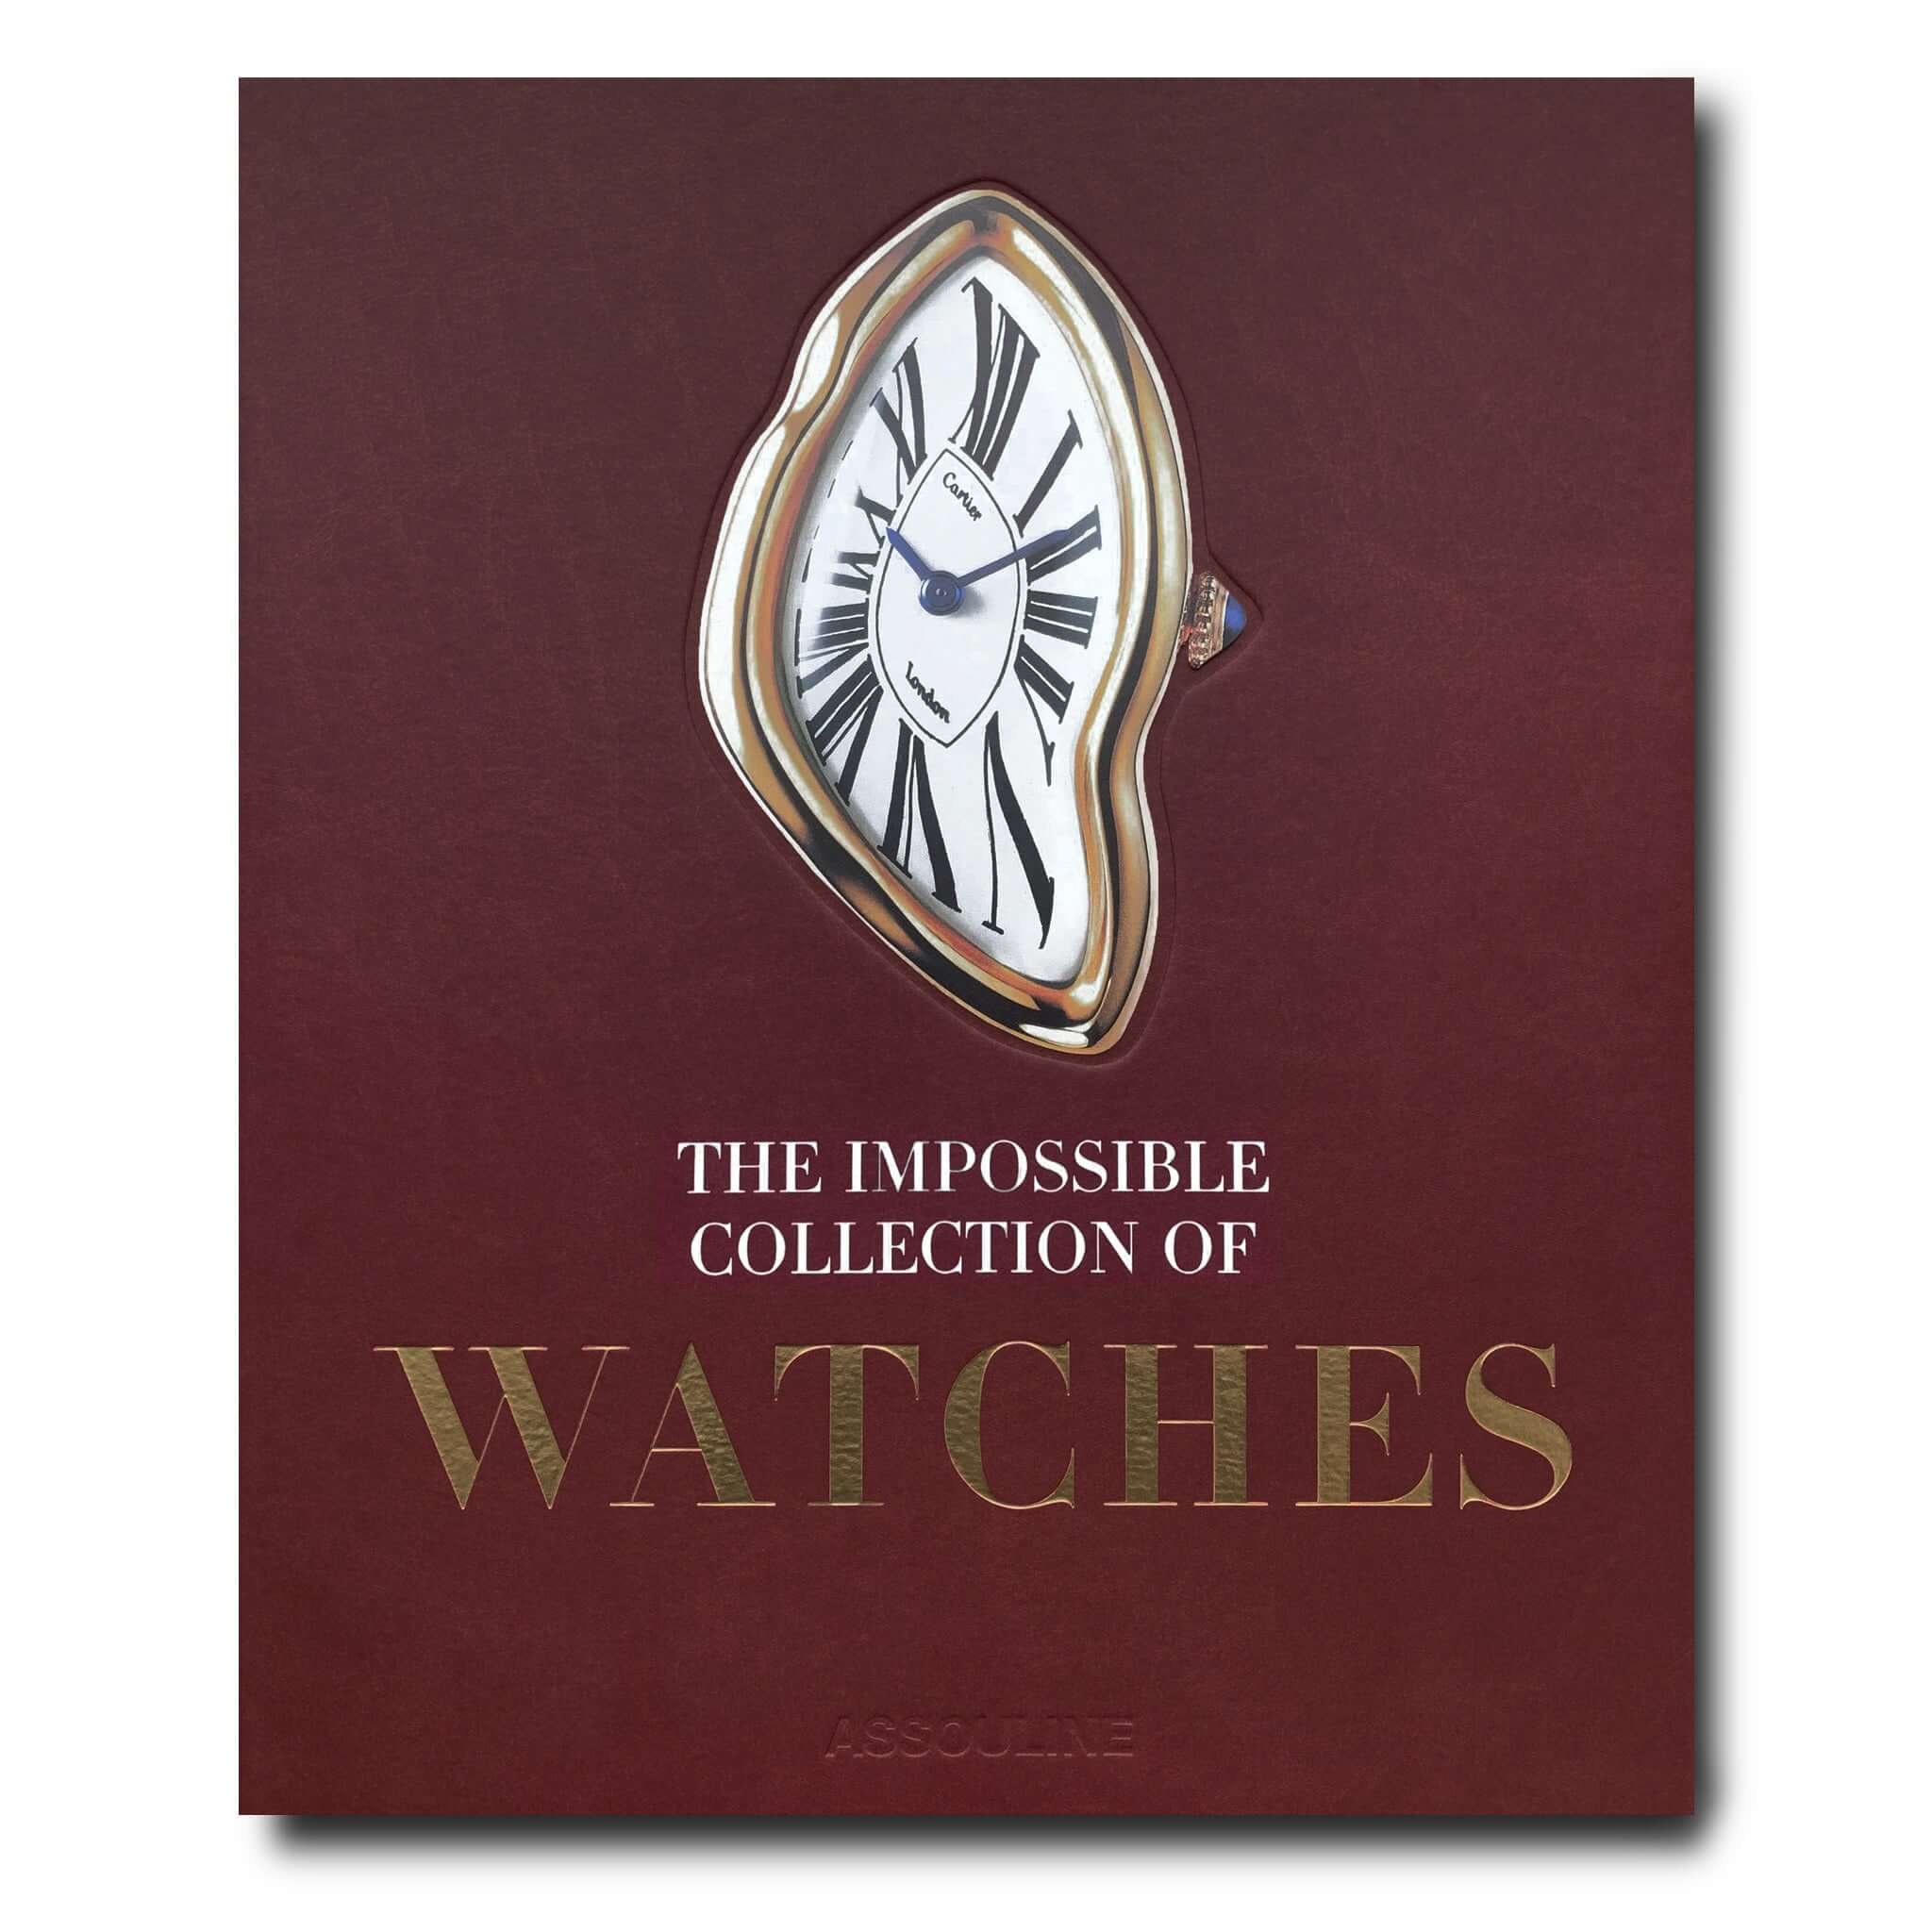 A book titled "The Impossible Collection of Watches" by Assouline, featuring a cover design with an embossed, distorted wristwatch graphic.